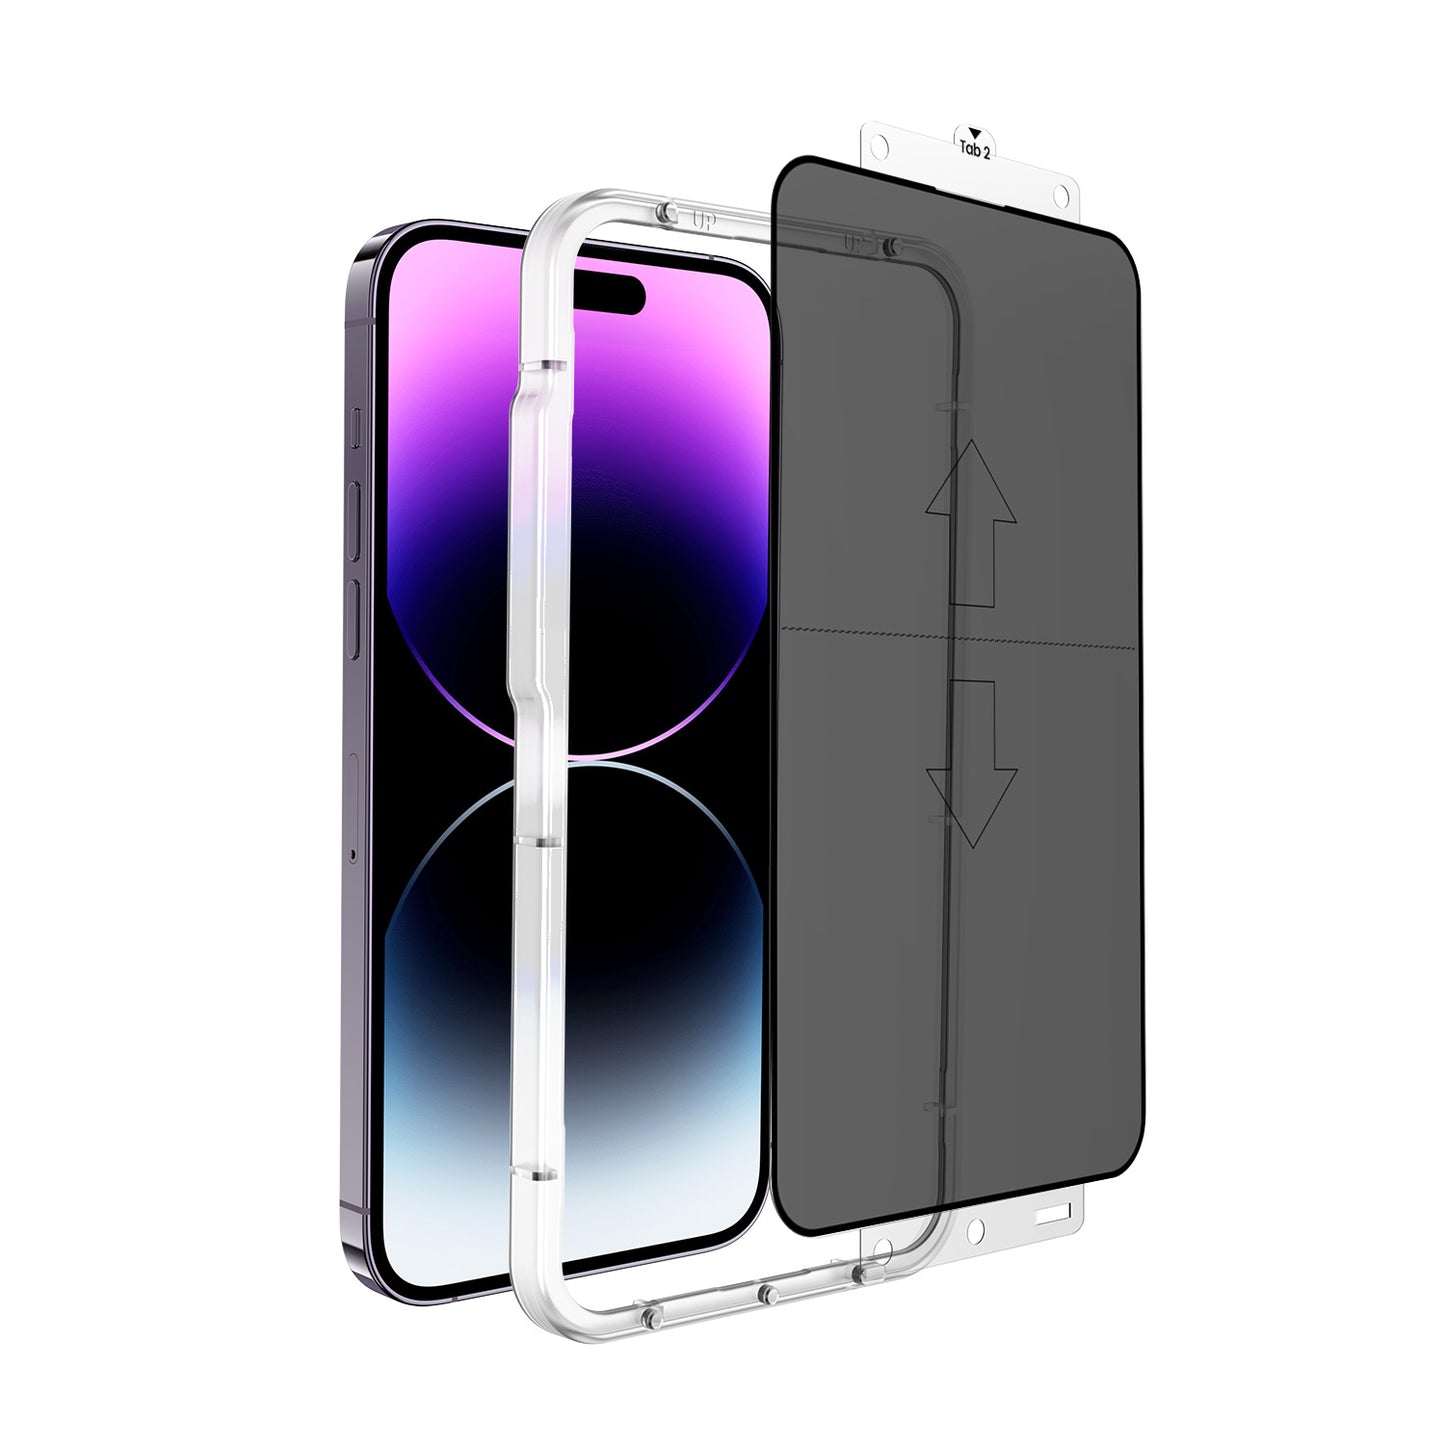 Totem 3D Hammer Proof Screen Protector for iPhone 13 Pro